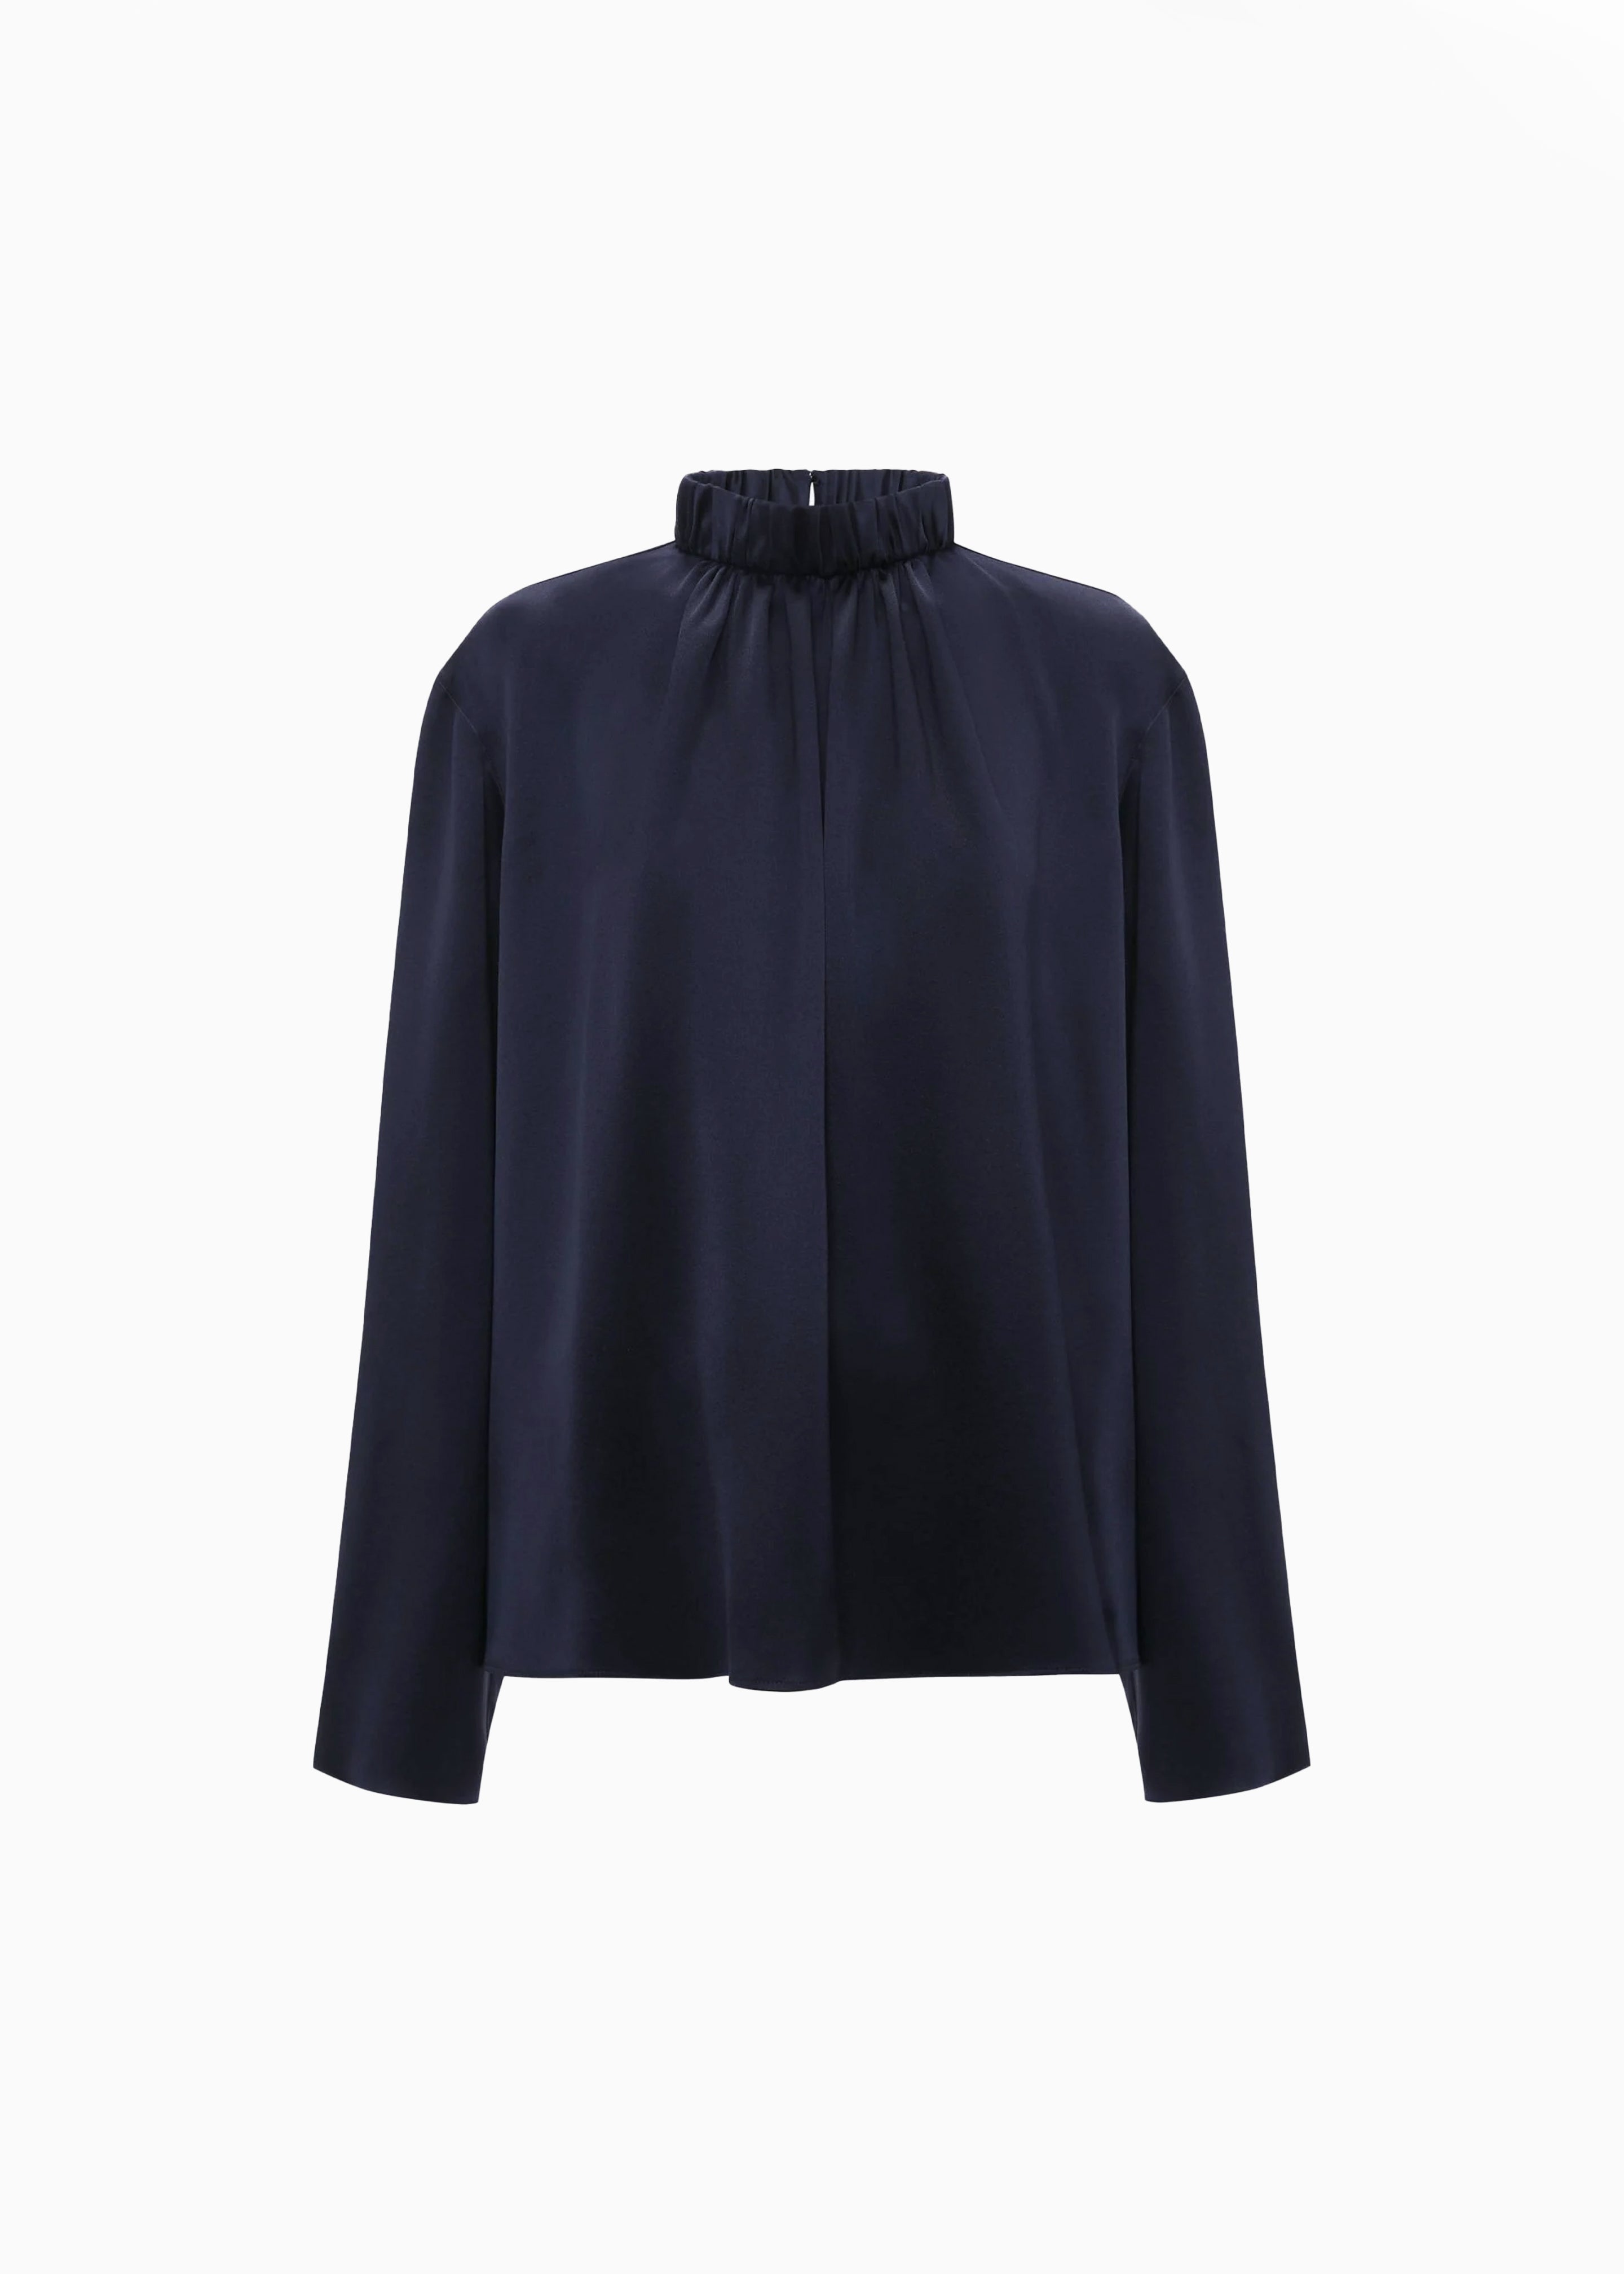 JW Anderson High Neck Gathered Top - Navy - 6